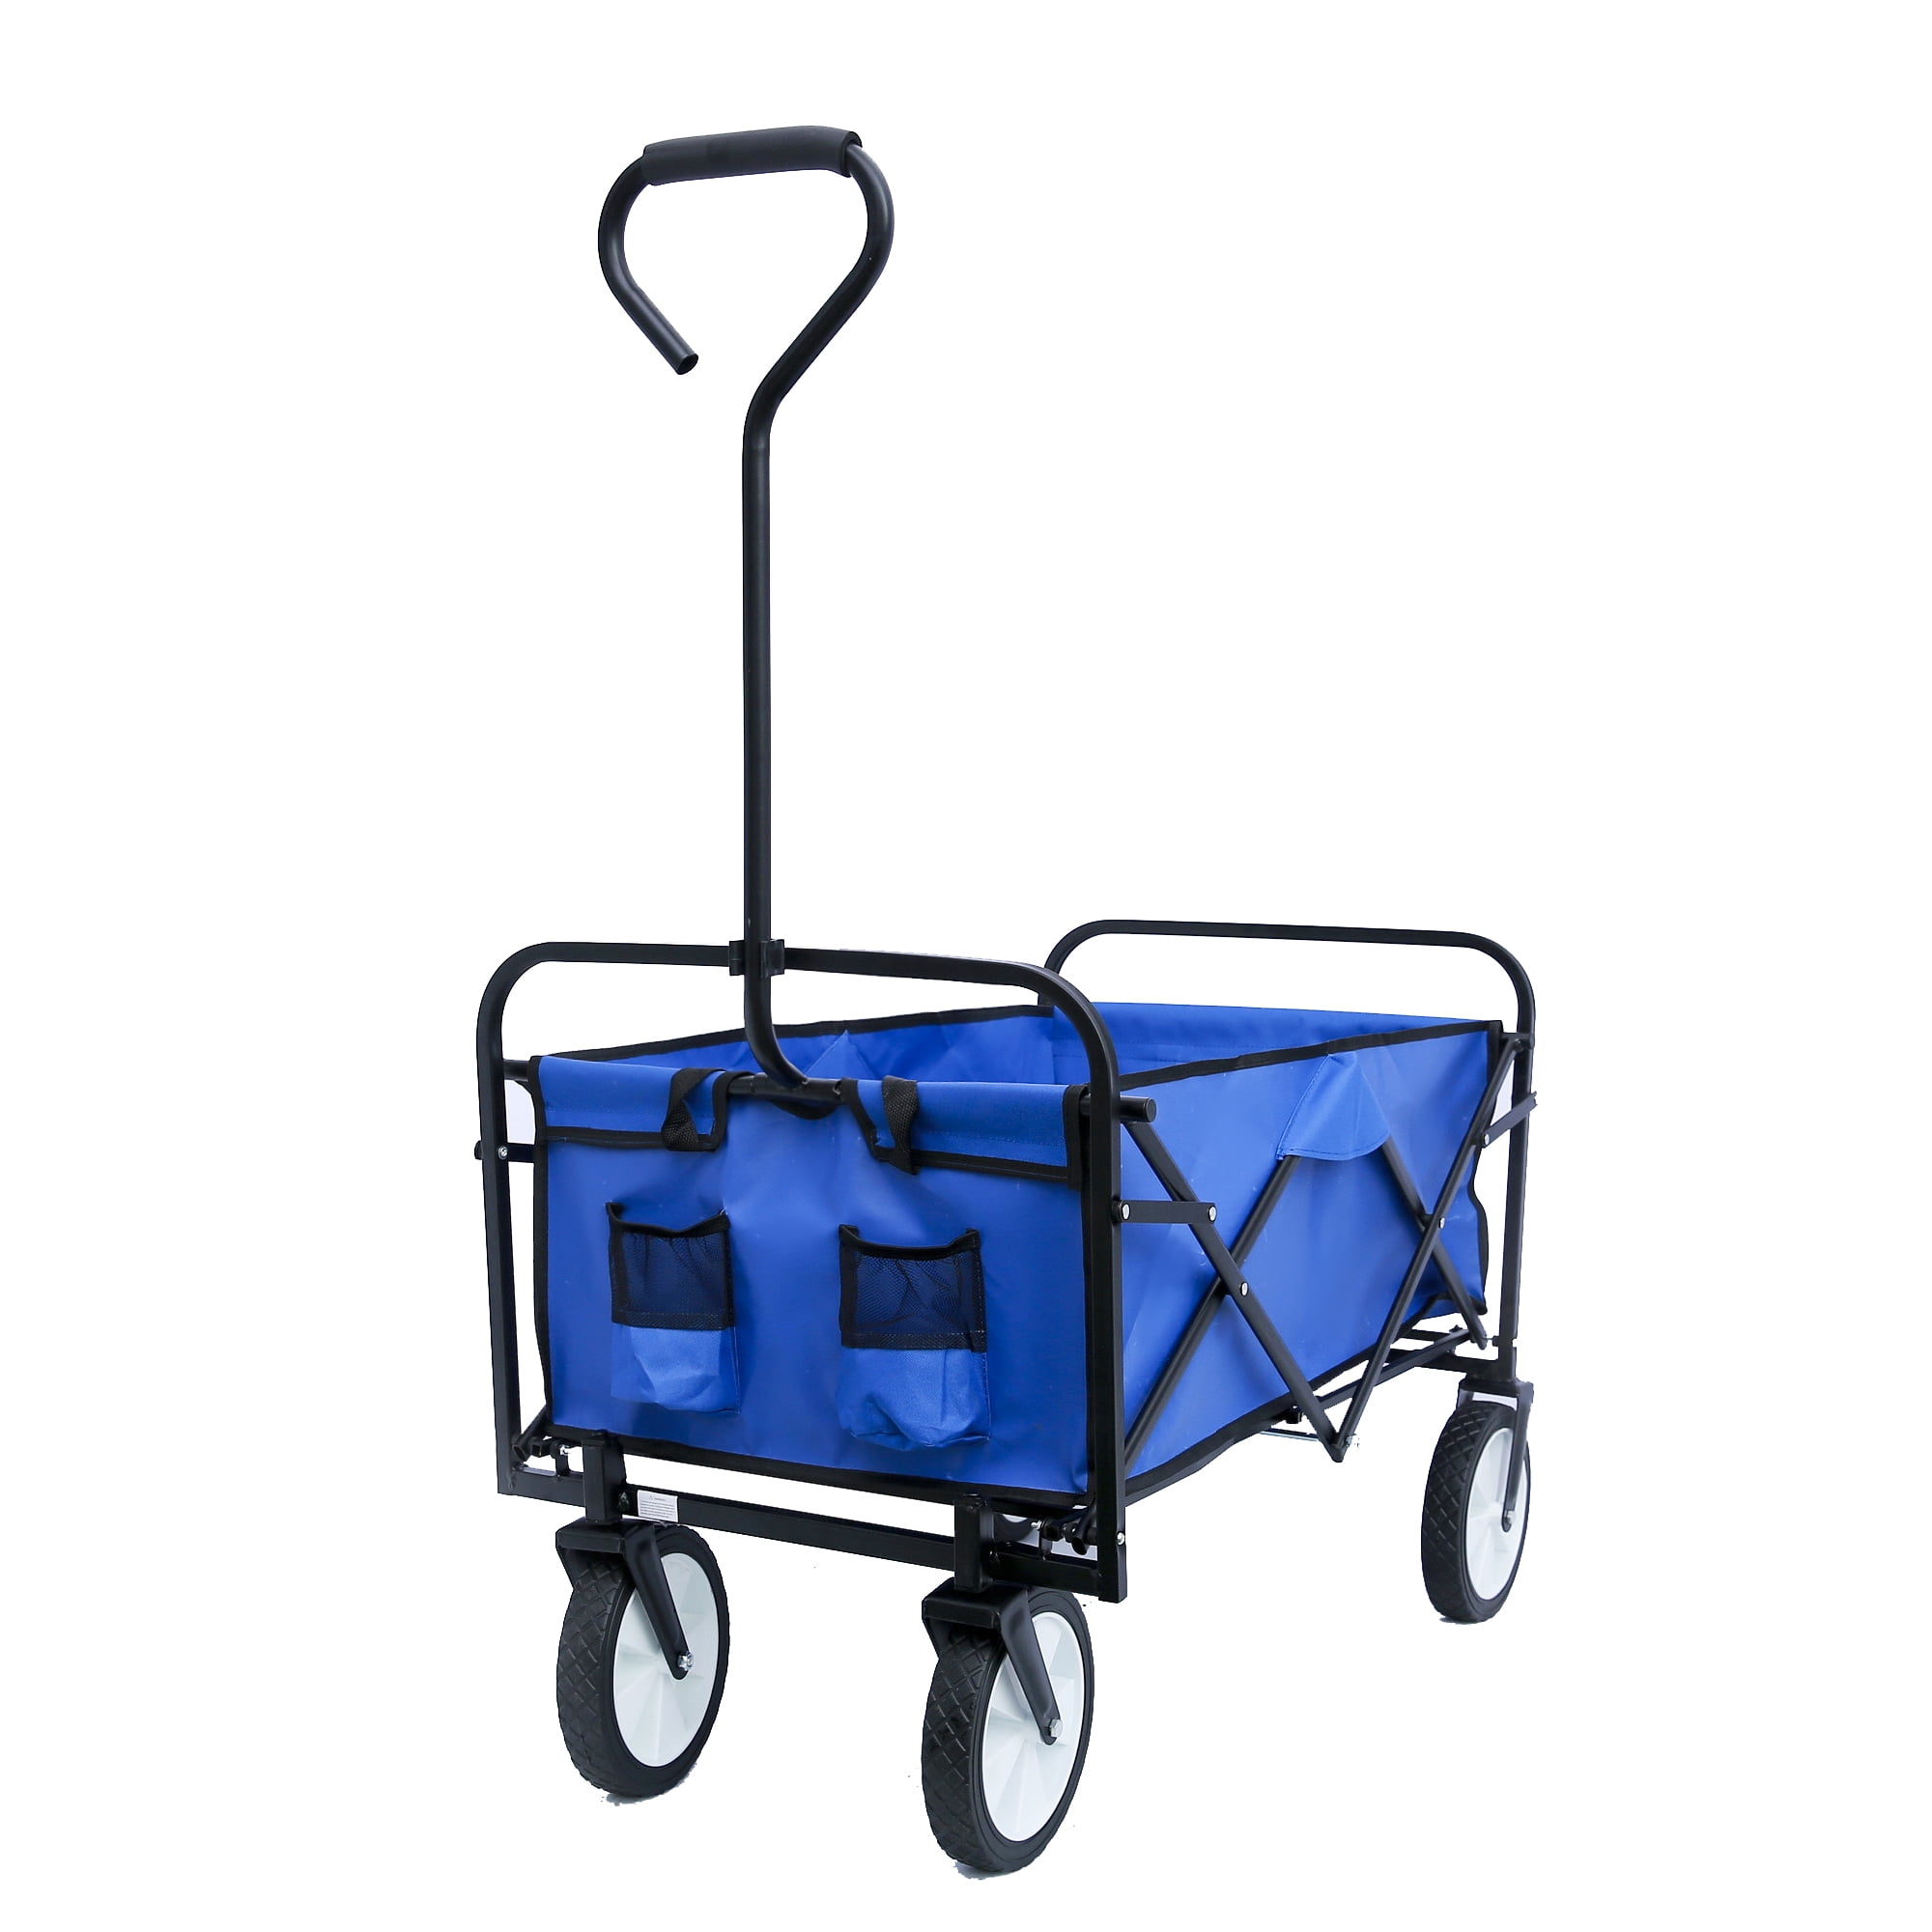 Details about   Folding Wagon Collapsible Garden Beach Utility Push Cart Heavy Duty Portable US 